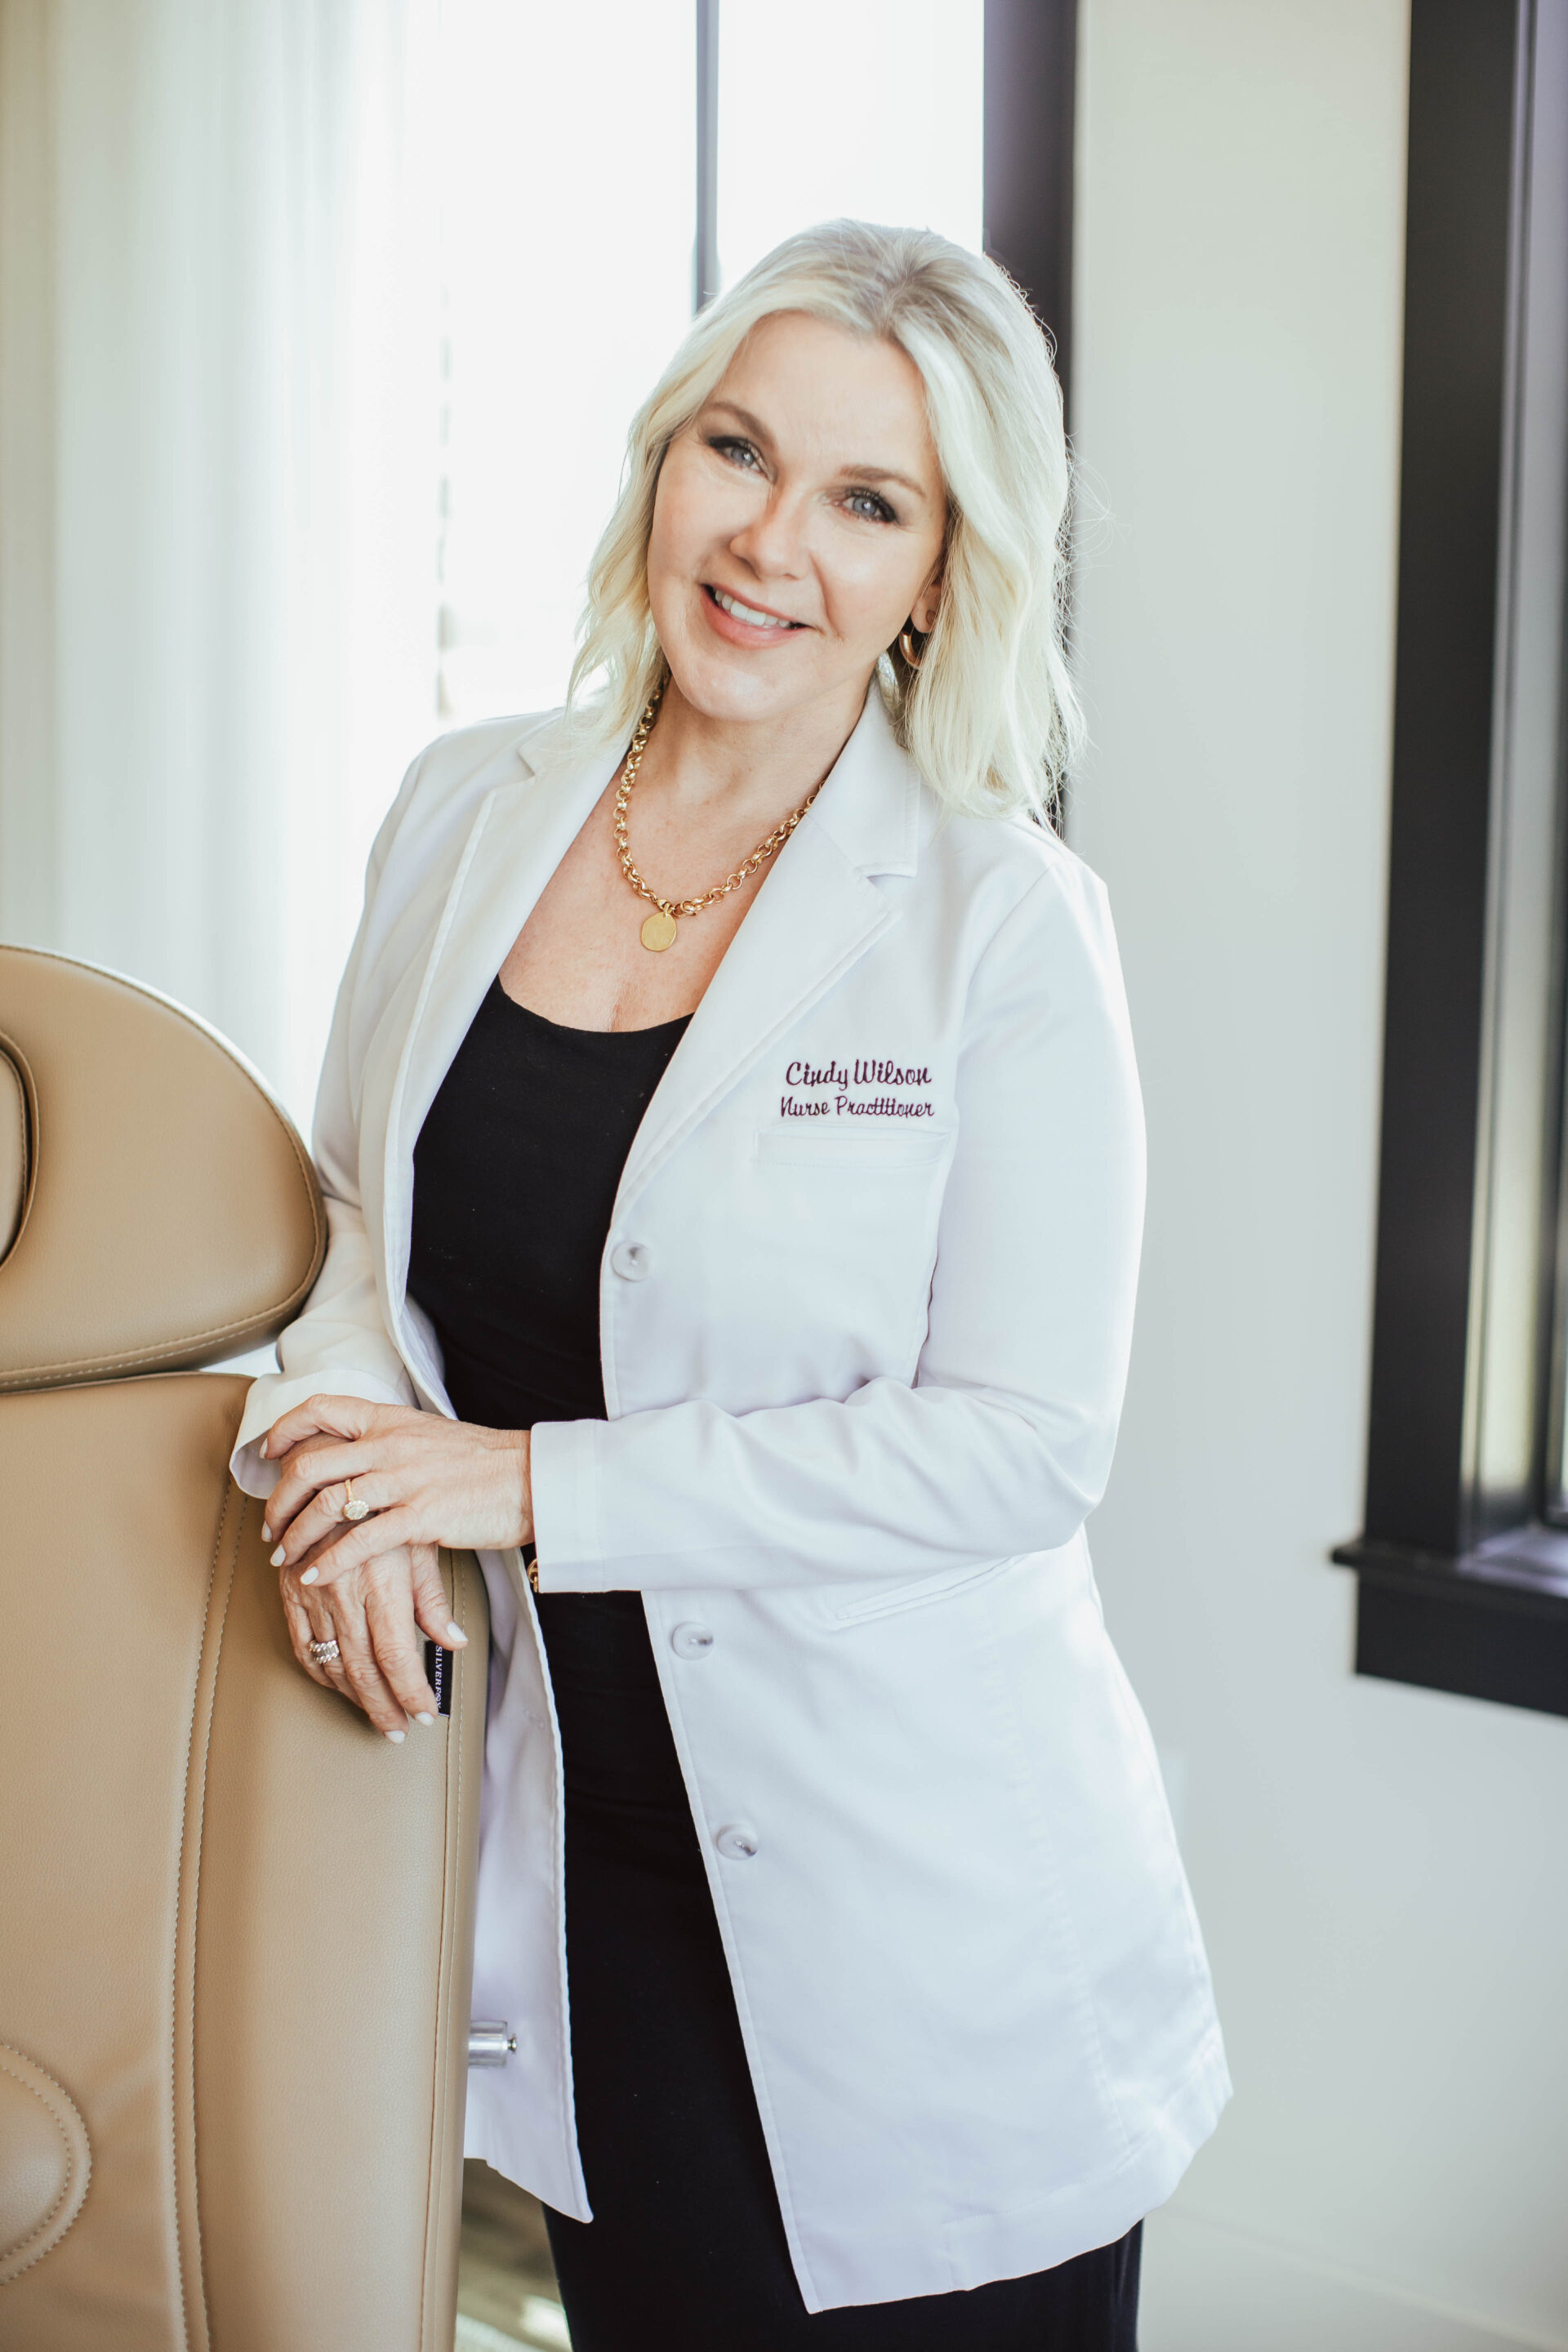 Profile image of Cindy Wilson, Nurse Practitioner at Curate MedAesthetics